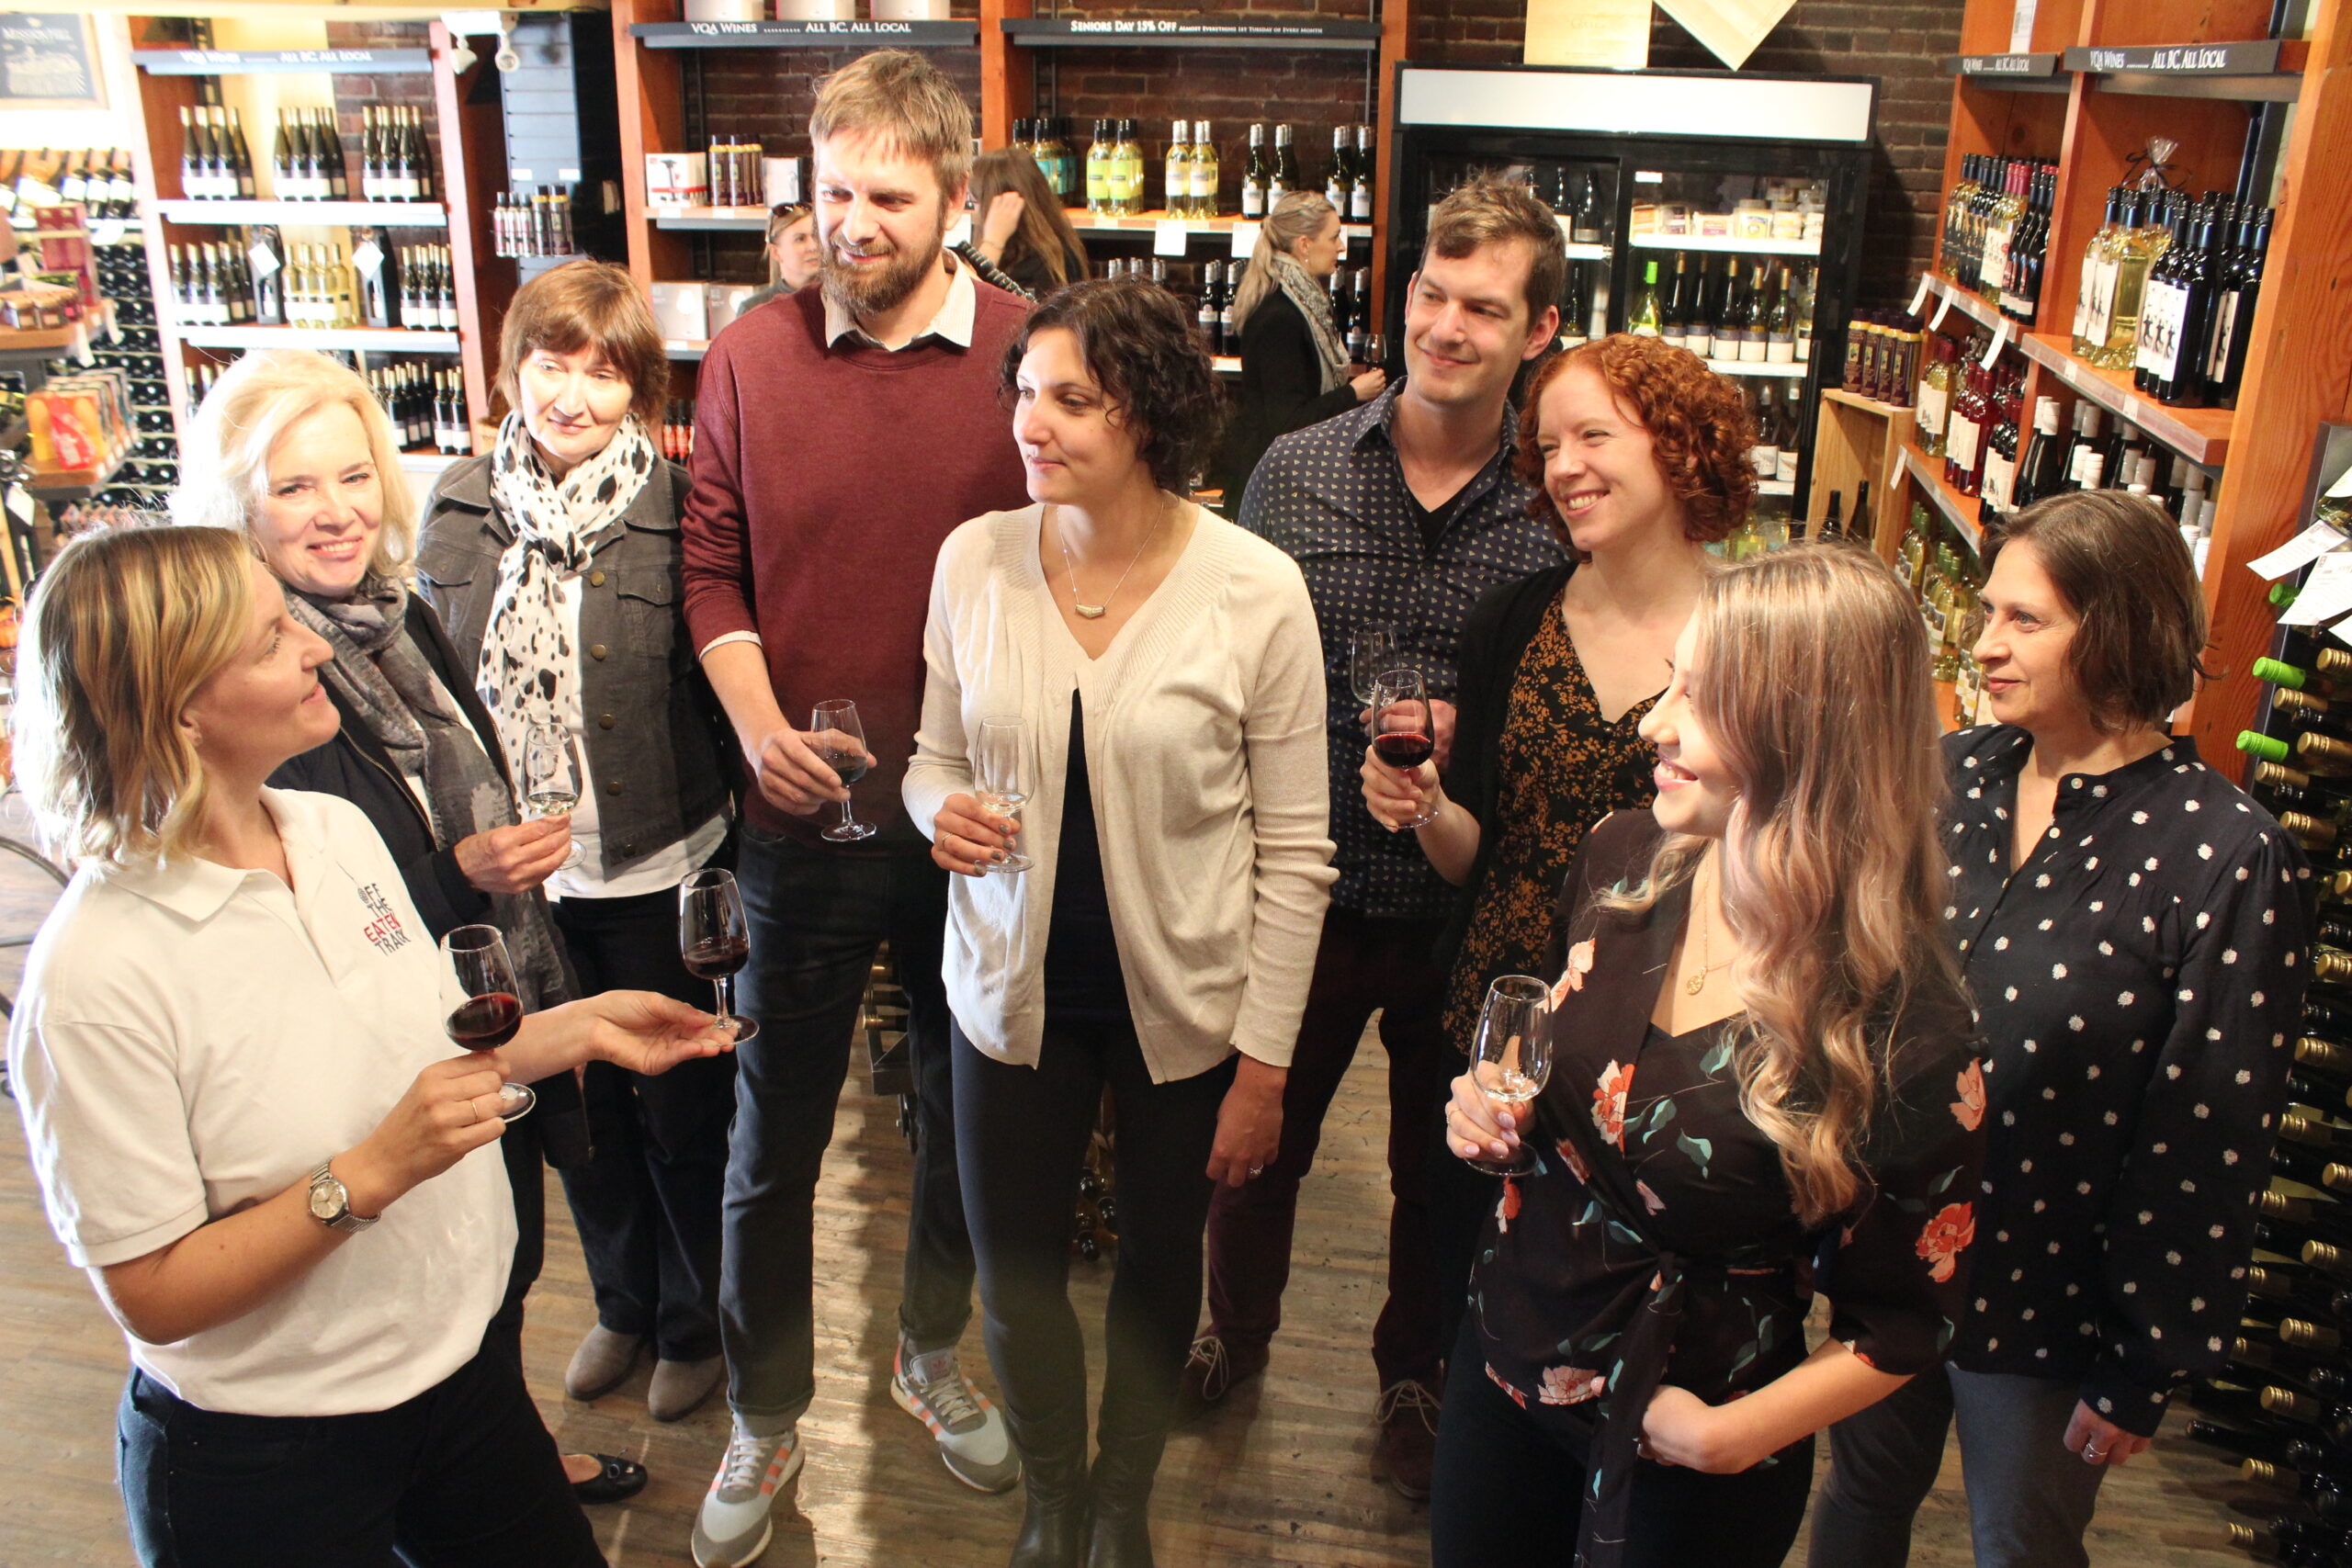 wine tasting on the downtown food & city tour